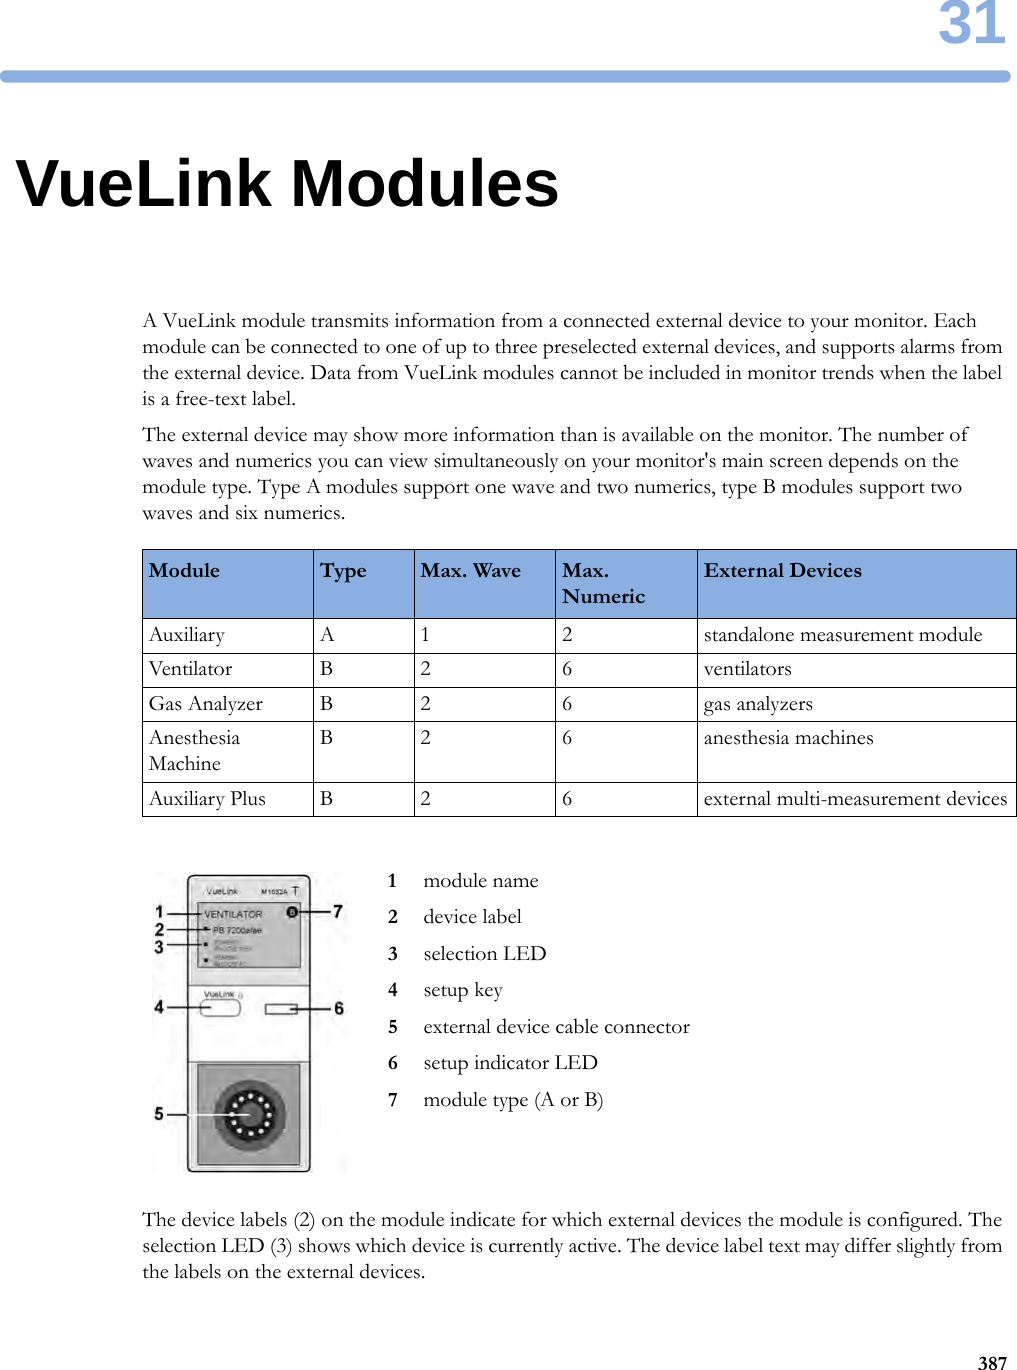 3138731VueLink ModulesA VueLink module transmits information from a connected external device to your monitor. Each module can be connected to one of up to three preselected external devices, and supports alarms from the external device. Data from VueLink modules cannot be included in monitor trends when the label is a free-text label.The external device may show more information than is available on the monitor. The number of waves and numerics you can view simultaneously on your monitor&apos;s main screen depends on the module type. Type A modules support one wave and two numerics, type B modules support two waves and six numerics.The device labels (2) on the module indicate for which external devices the module is configured. The selection LED (3) shows which device is currently active. The device label text may differ slightly from the labels on the external devices.Module Type Max. Wave Max. NumericExternal DevicesAuxiliary A 1 2 standalone measurement moduleVentilator B 2 6 ventilatorsGas Analyzer B 2 6 gas analyzersAnesthesia MachineB 2 6 anesthesia machinesAuxiliary Plus B 2 6 external multi-measurement devices1module name2device label3selection LED4setup key5external device cable connector6setup indicator LED7module type (A or B)